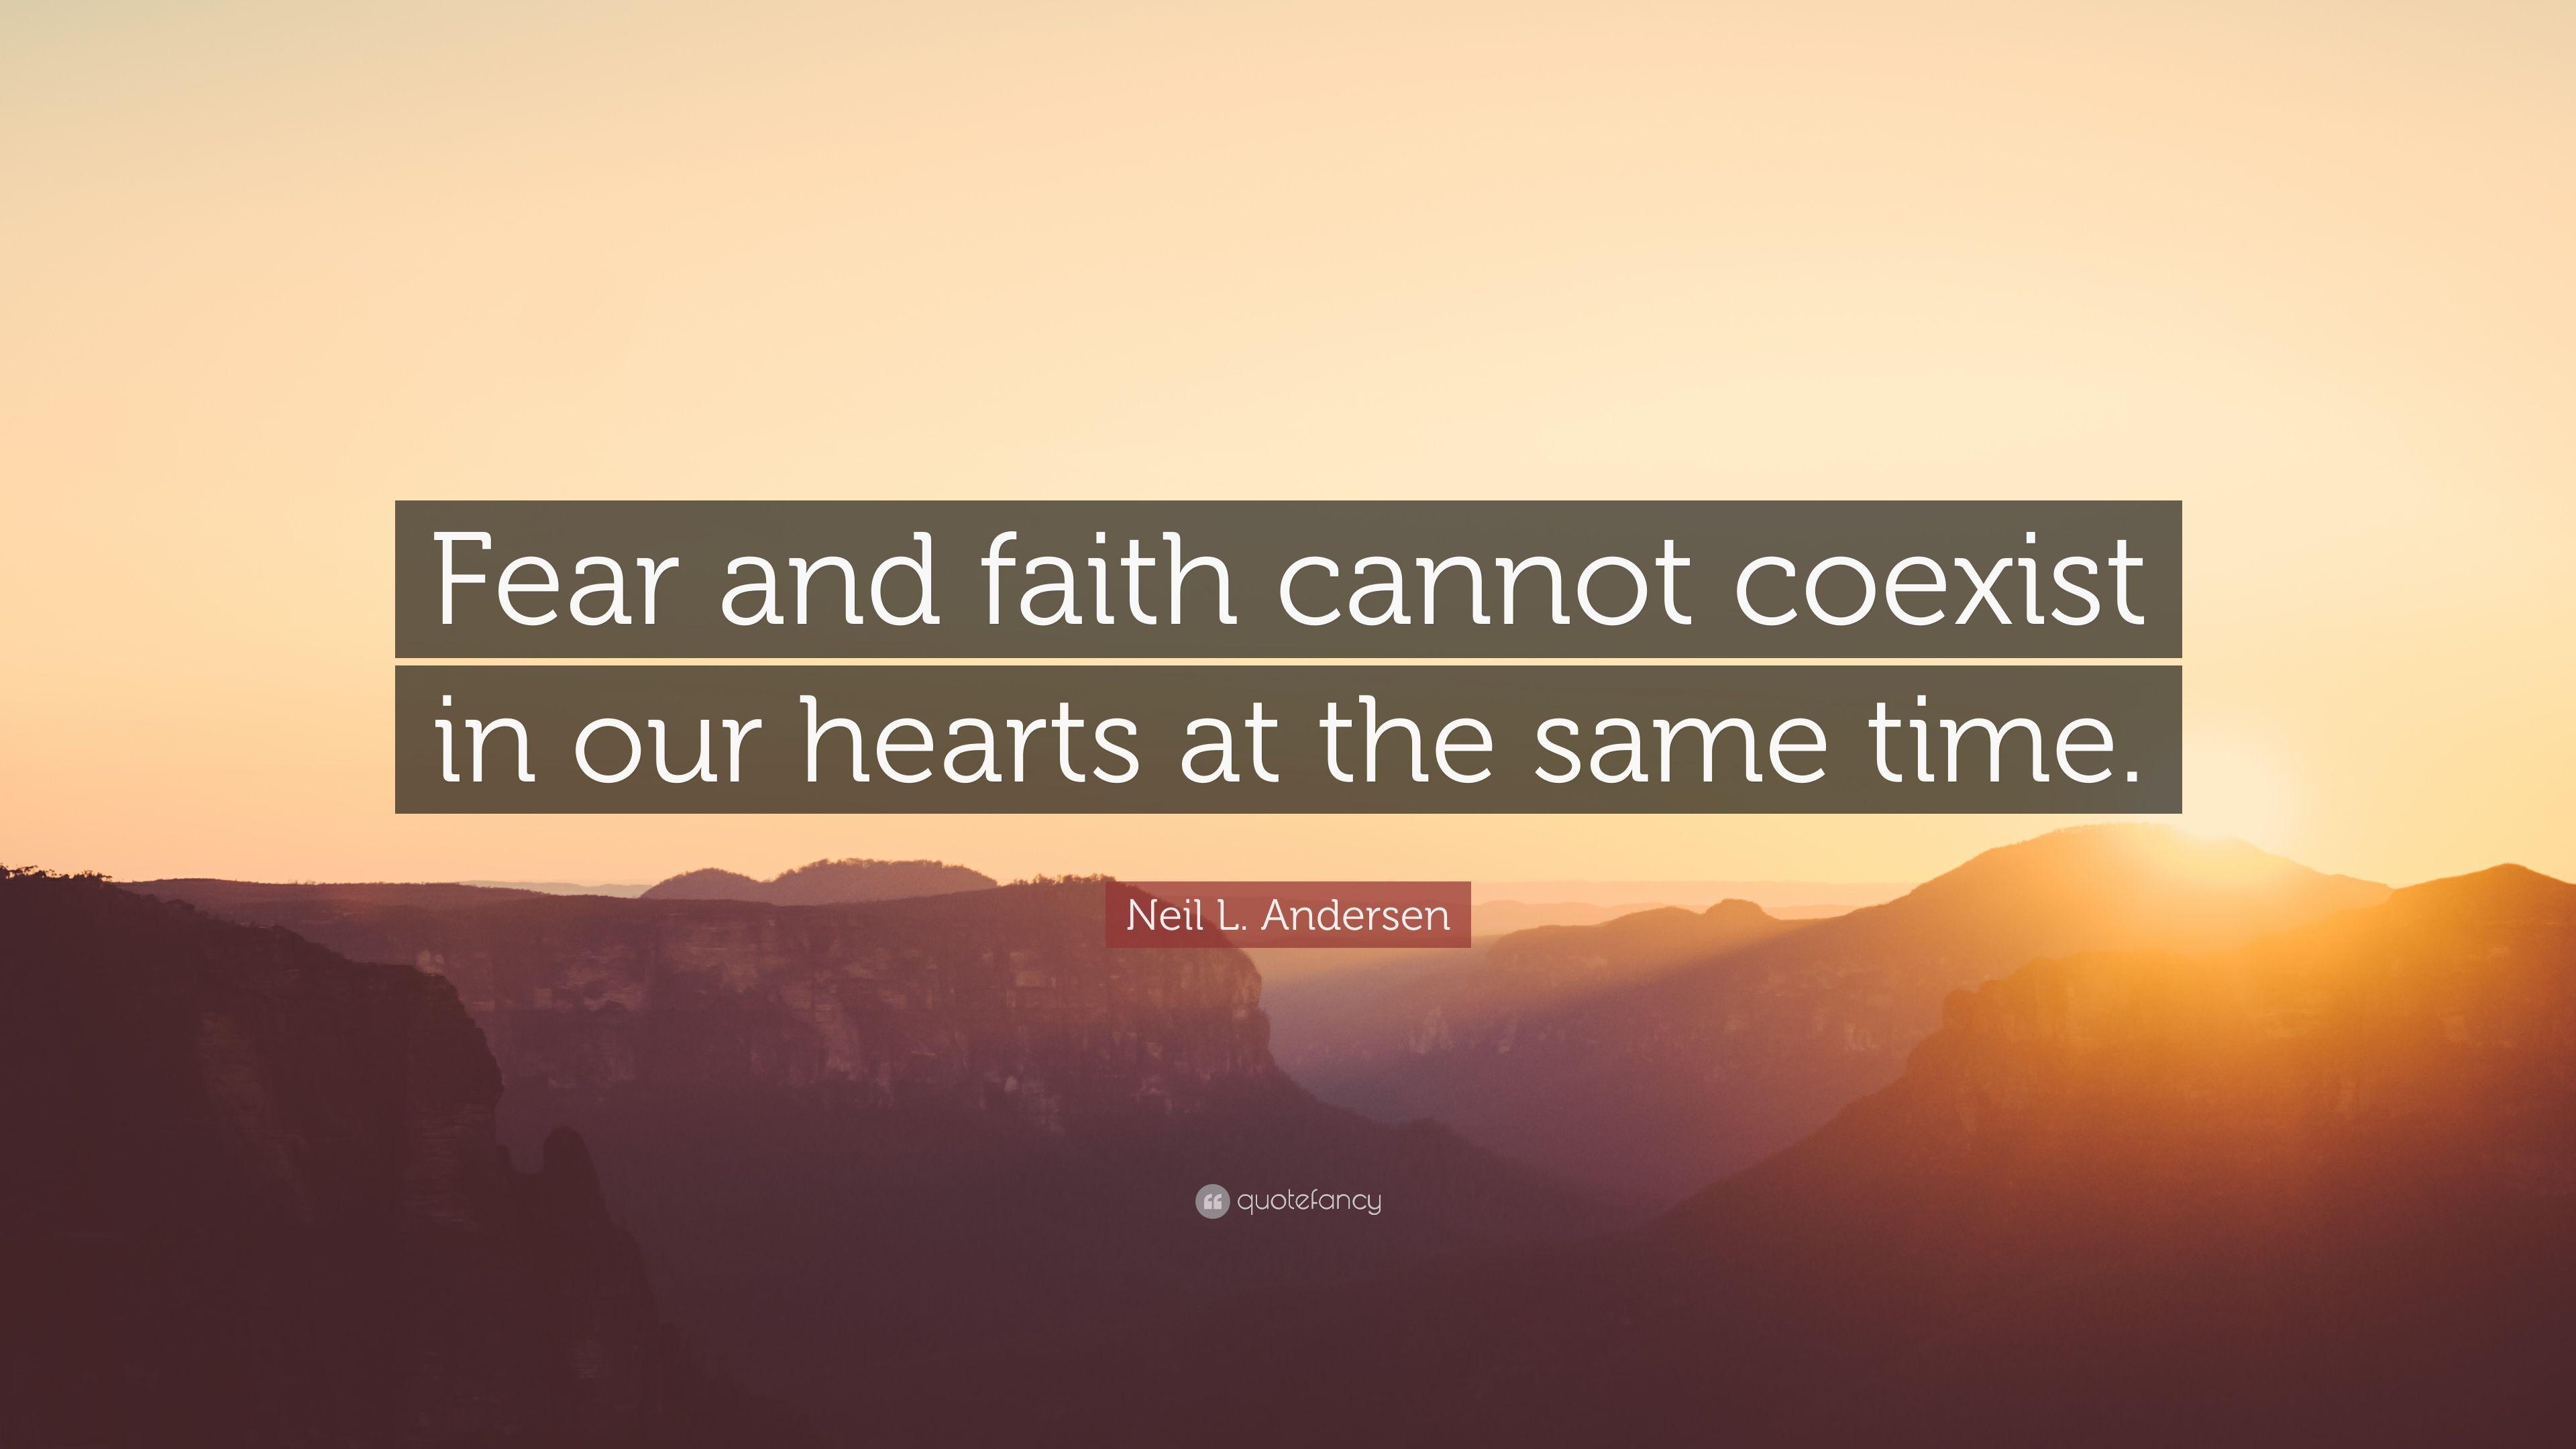 Neil L. Andersen Quote: “Fear and faith cannot coexist in our hearts